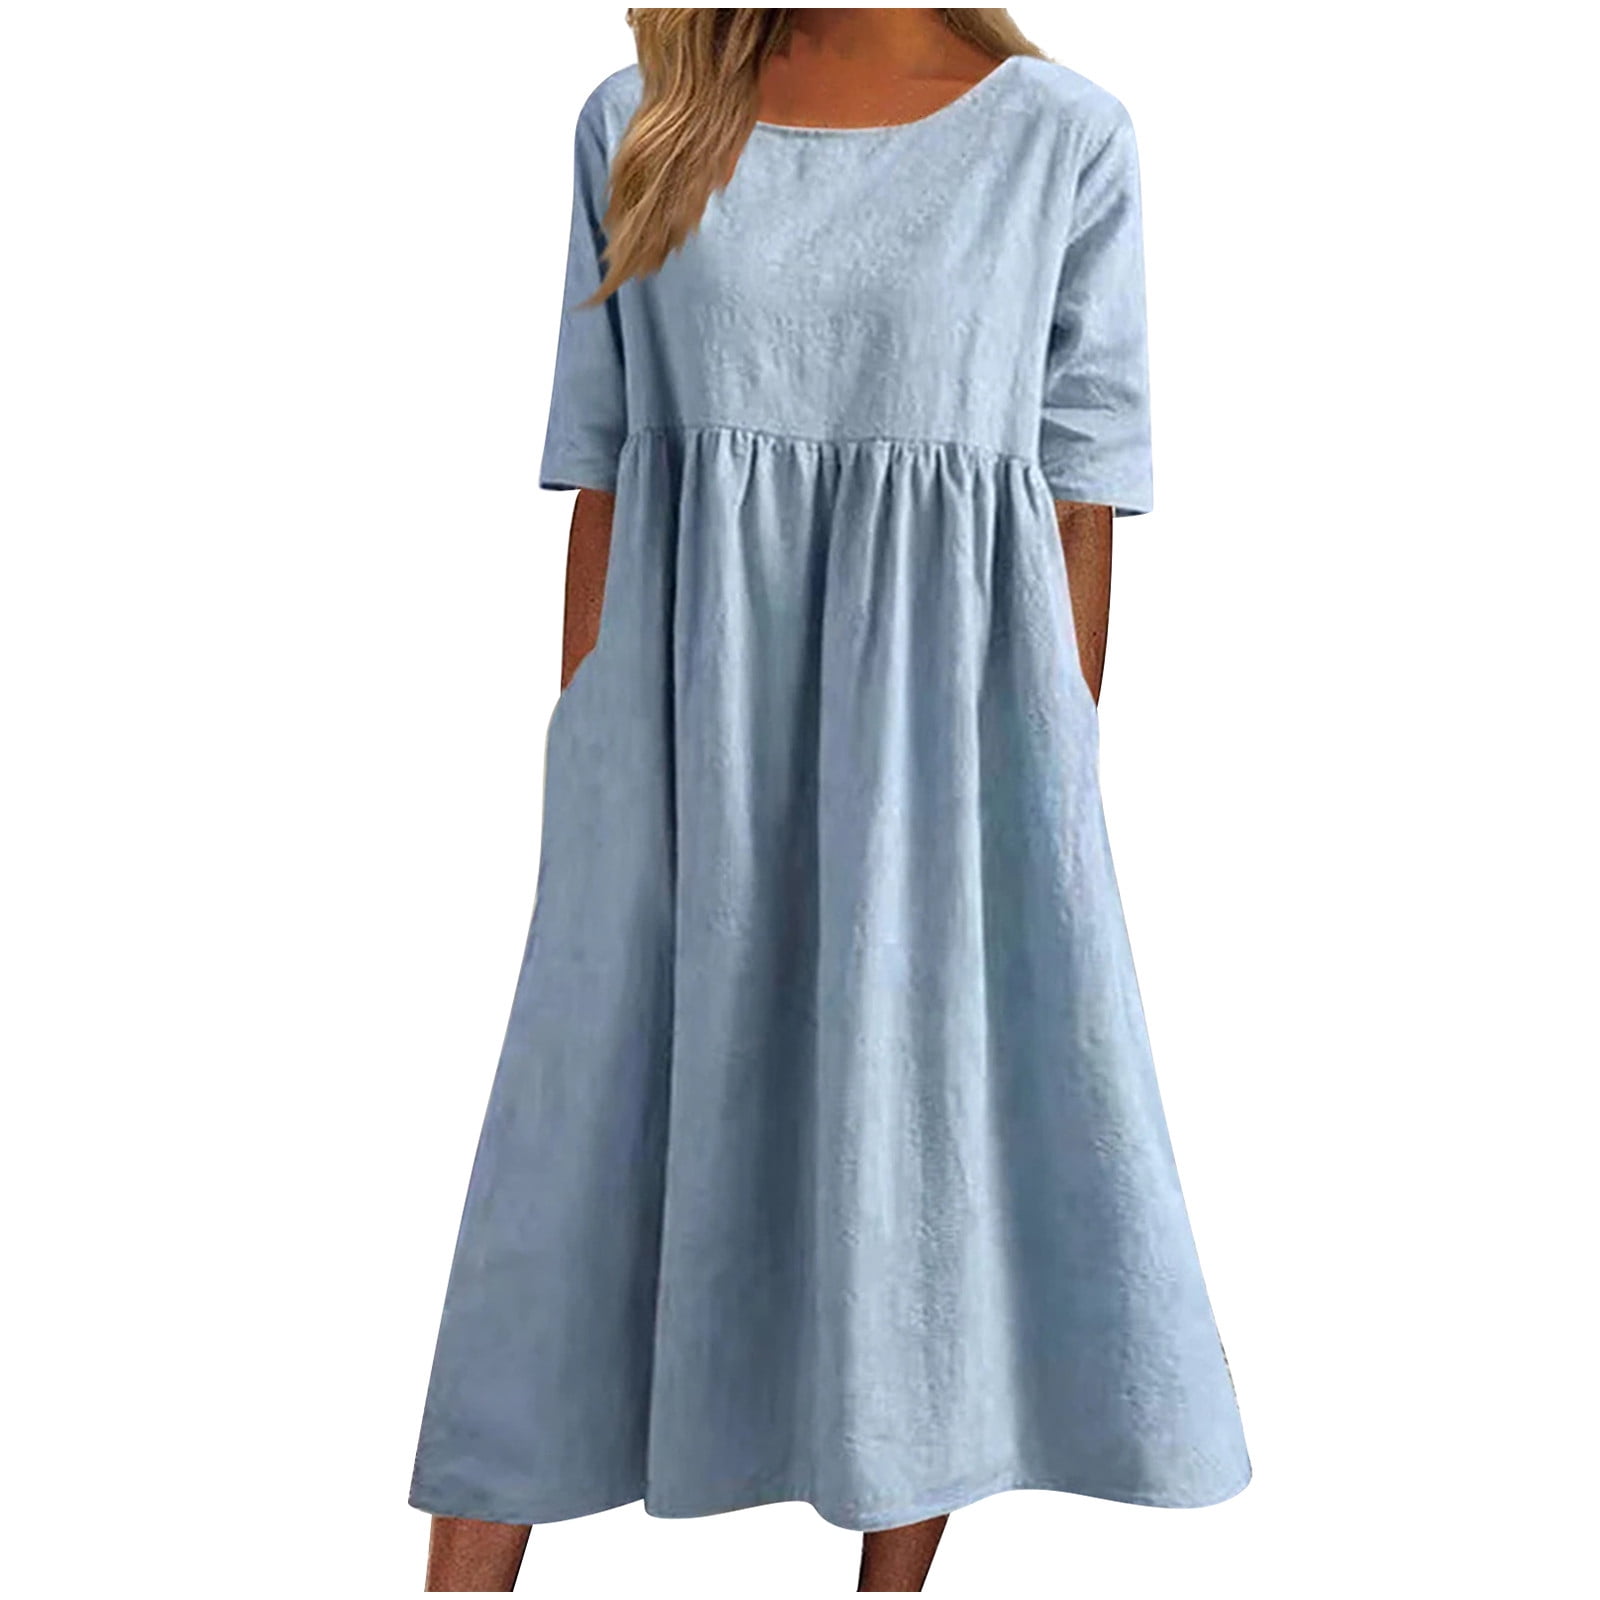 OVBMPZD Round Neck Casual Dress Women Solid Loose Half Sleeve Swing ...